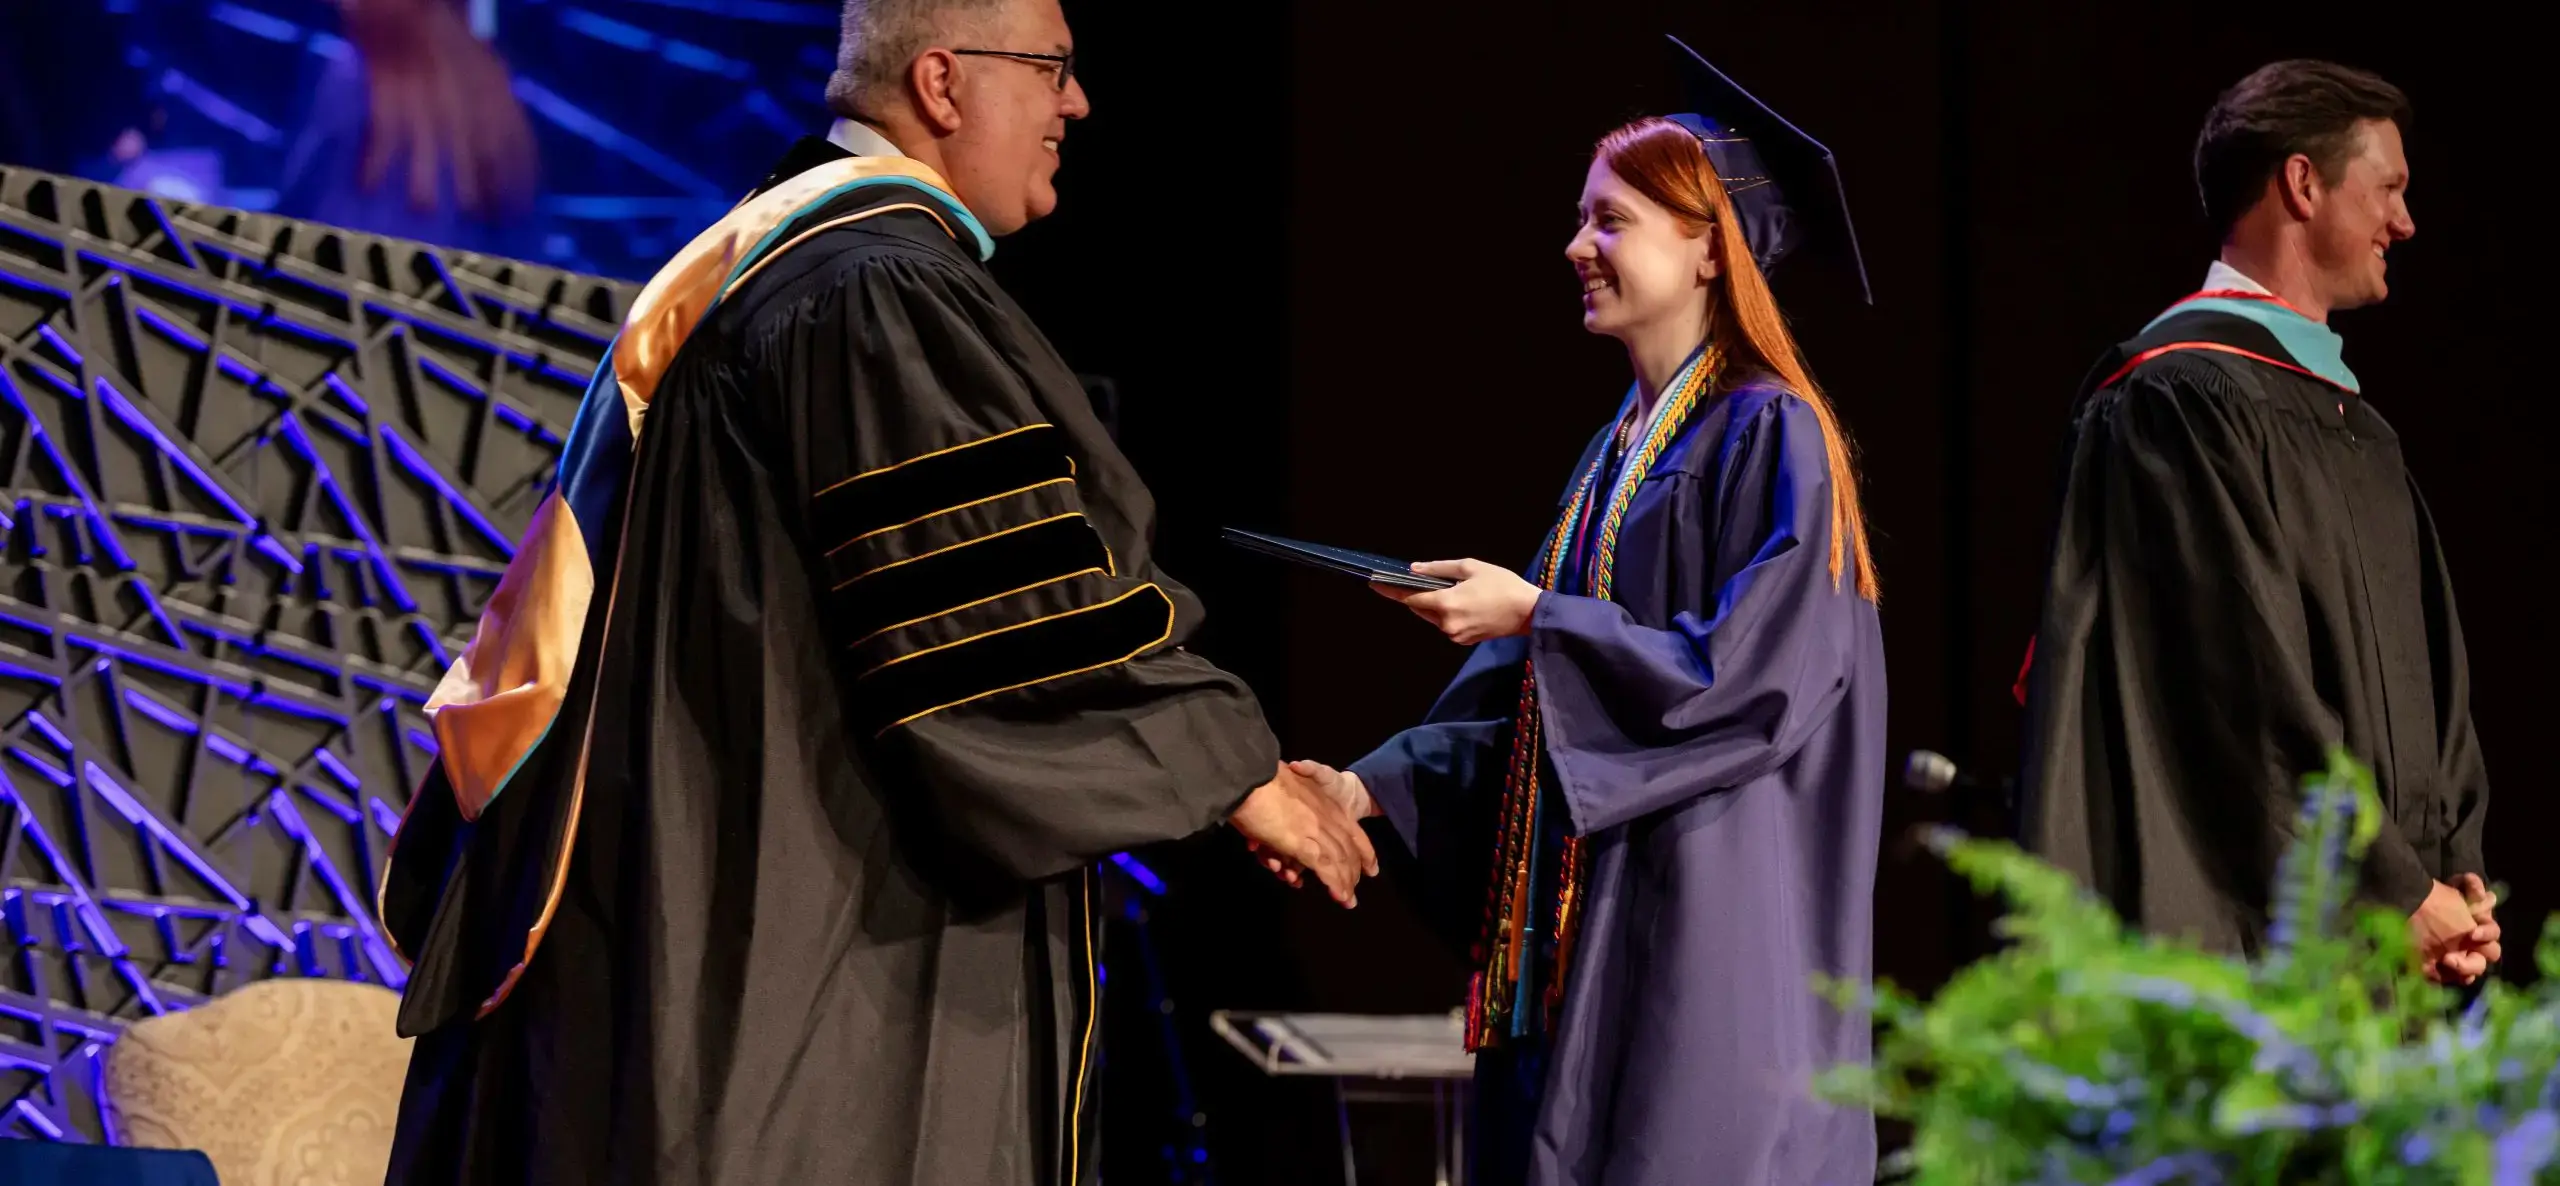 Student receives diploma at graduation ceremony